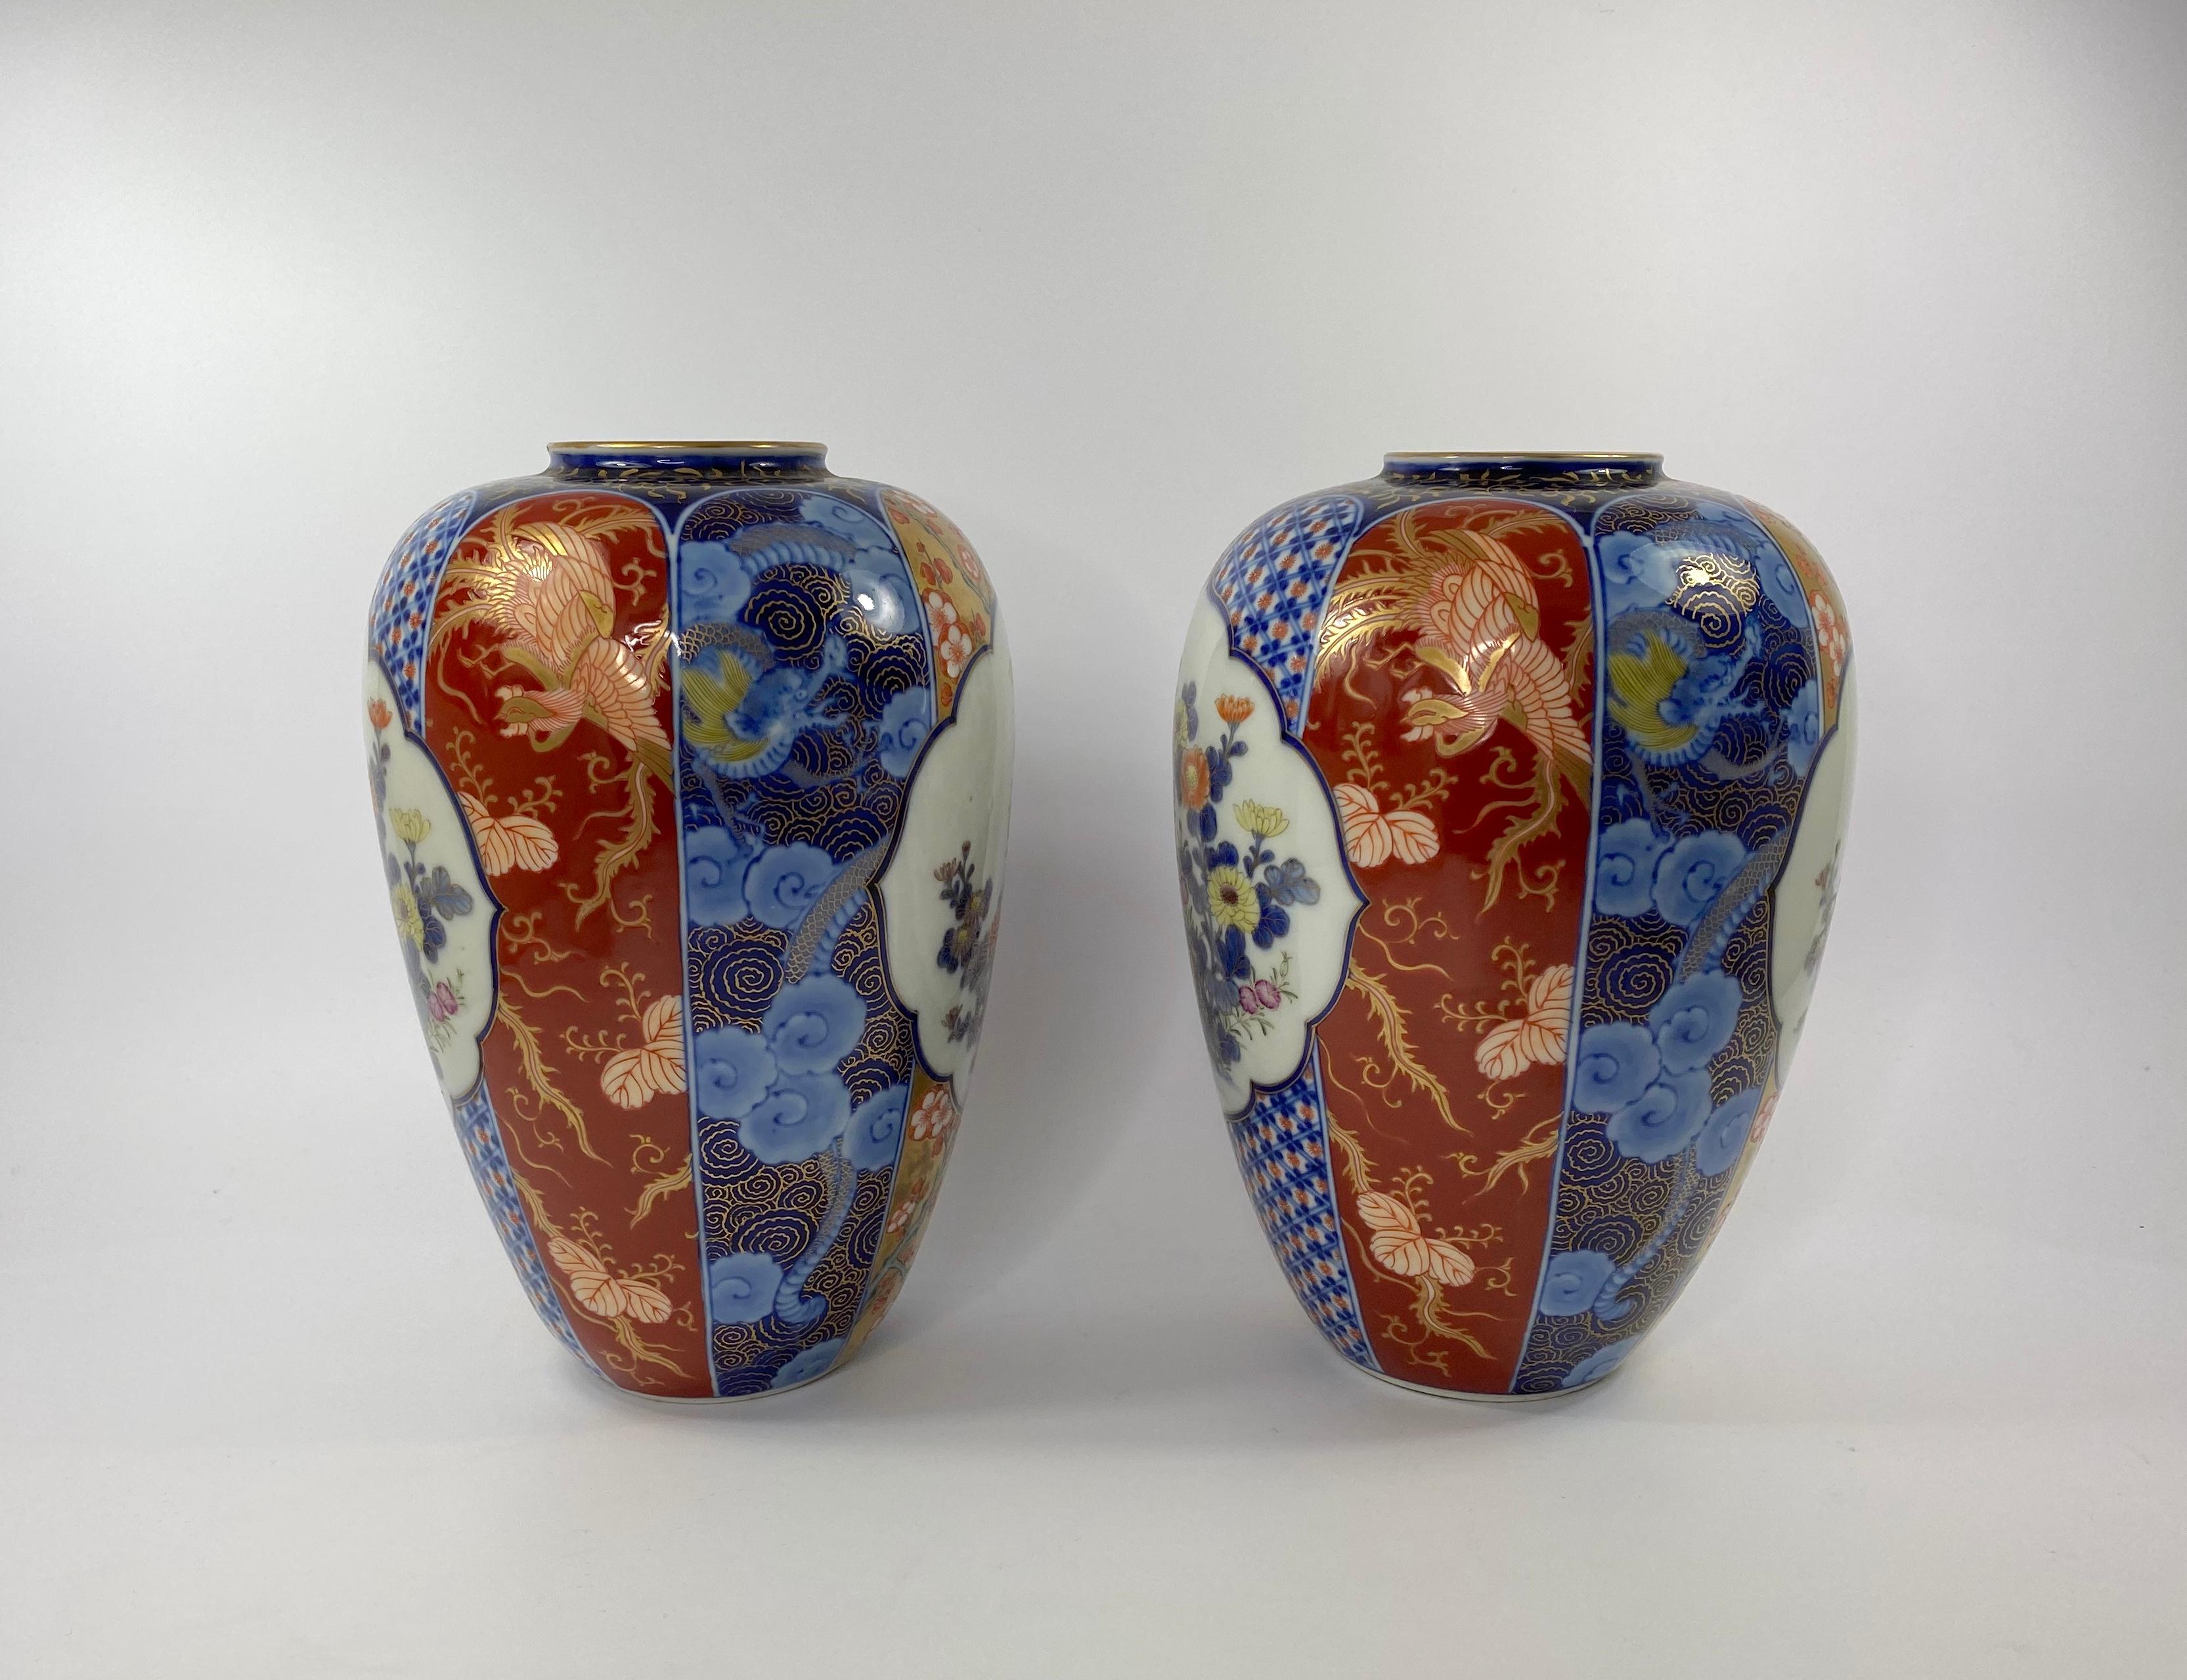 Pair of large Koransha porcelain, Imari vases, Japan, c. 1890. Meiji Period. Both vases finely painted with shaped panels of flowering plants, against a panelled ground of Phoenix, dragons, flowering plants, and textile motif. The flattened necks,